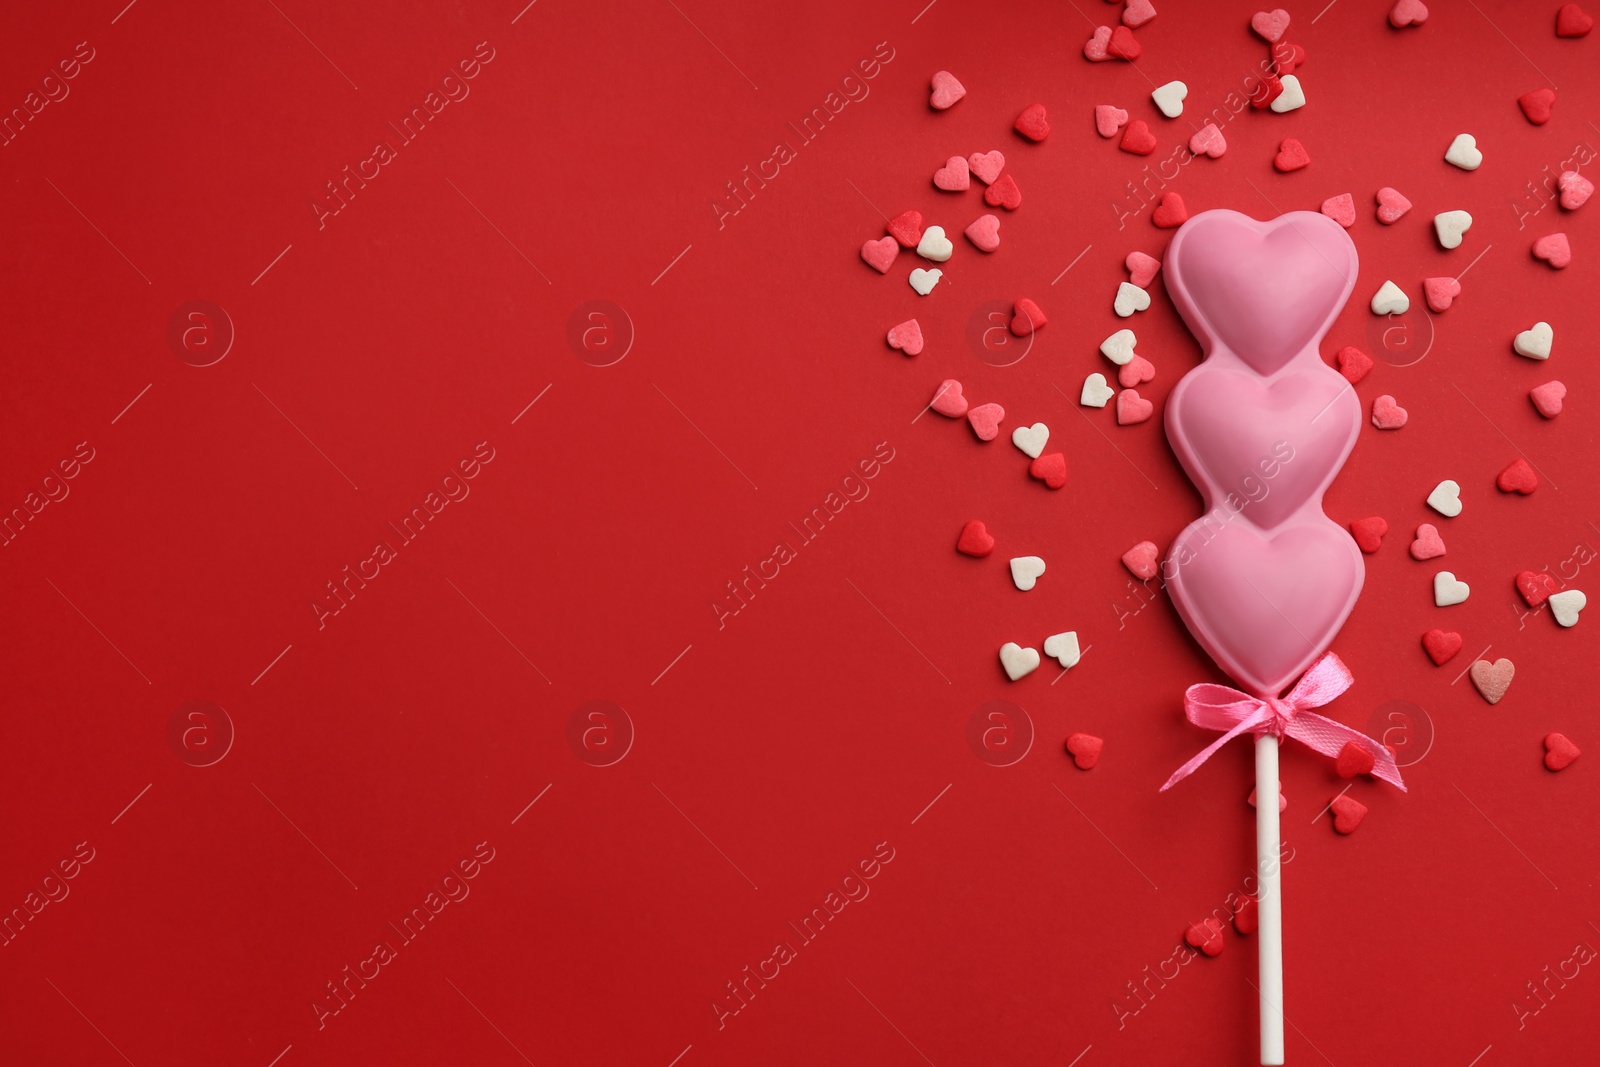 Photo of Chocolate heart shaped lollipop and sprinkles on red background, flat lay. Space for text